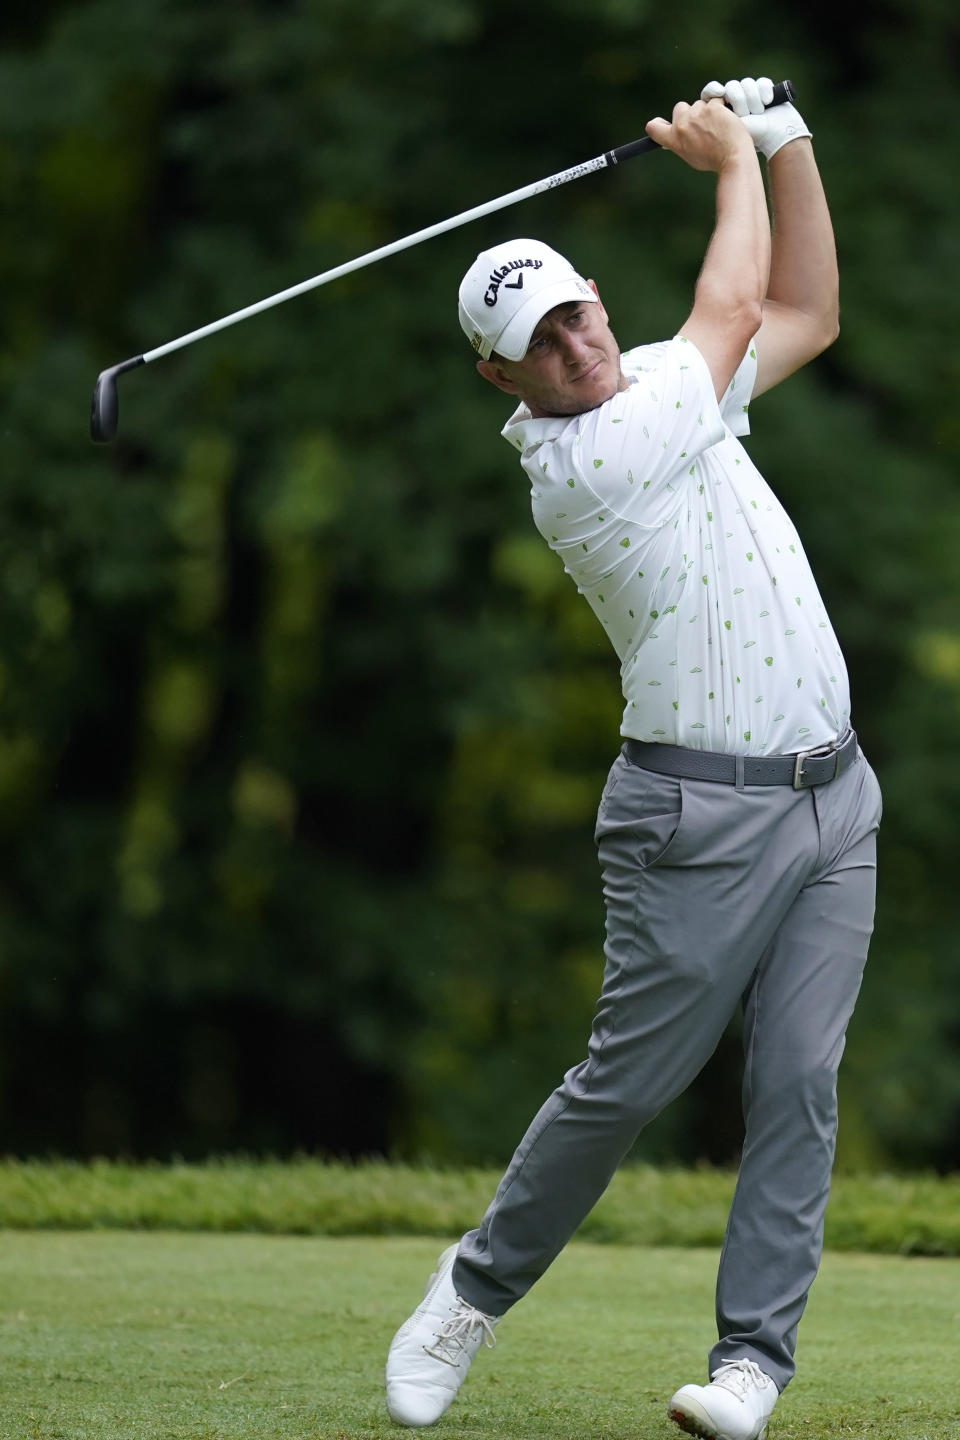 Emiliano Grillo, of Argentina, hits off the sixth tee during the second round of the John Deere Classic golf tournament, Friday, July 1, 2022, at TPC Deere Run in Silvis, Ill. (AP Photo/Charlie Neibergall)